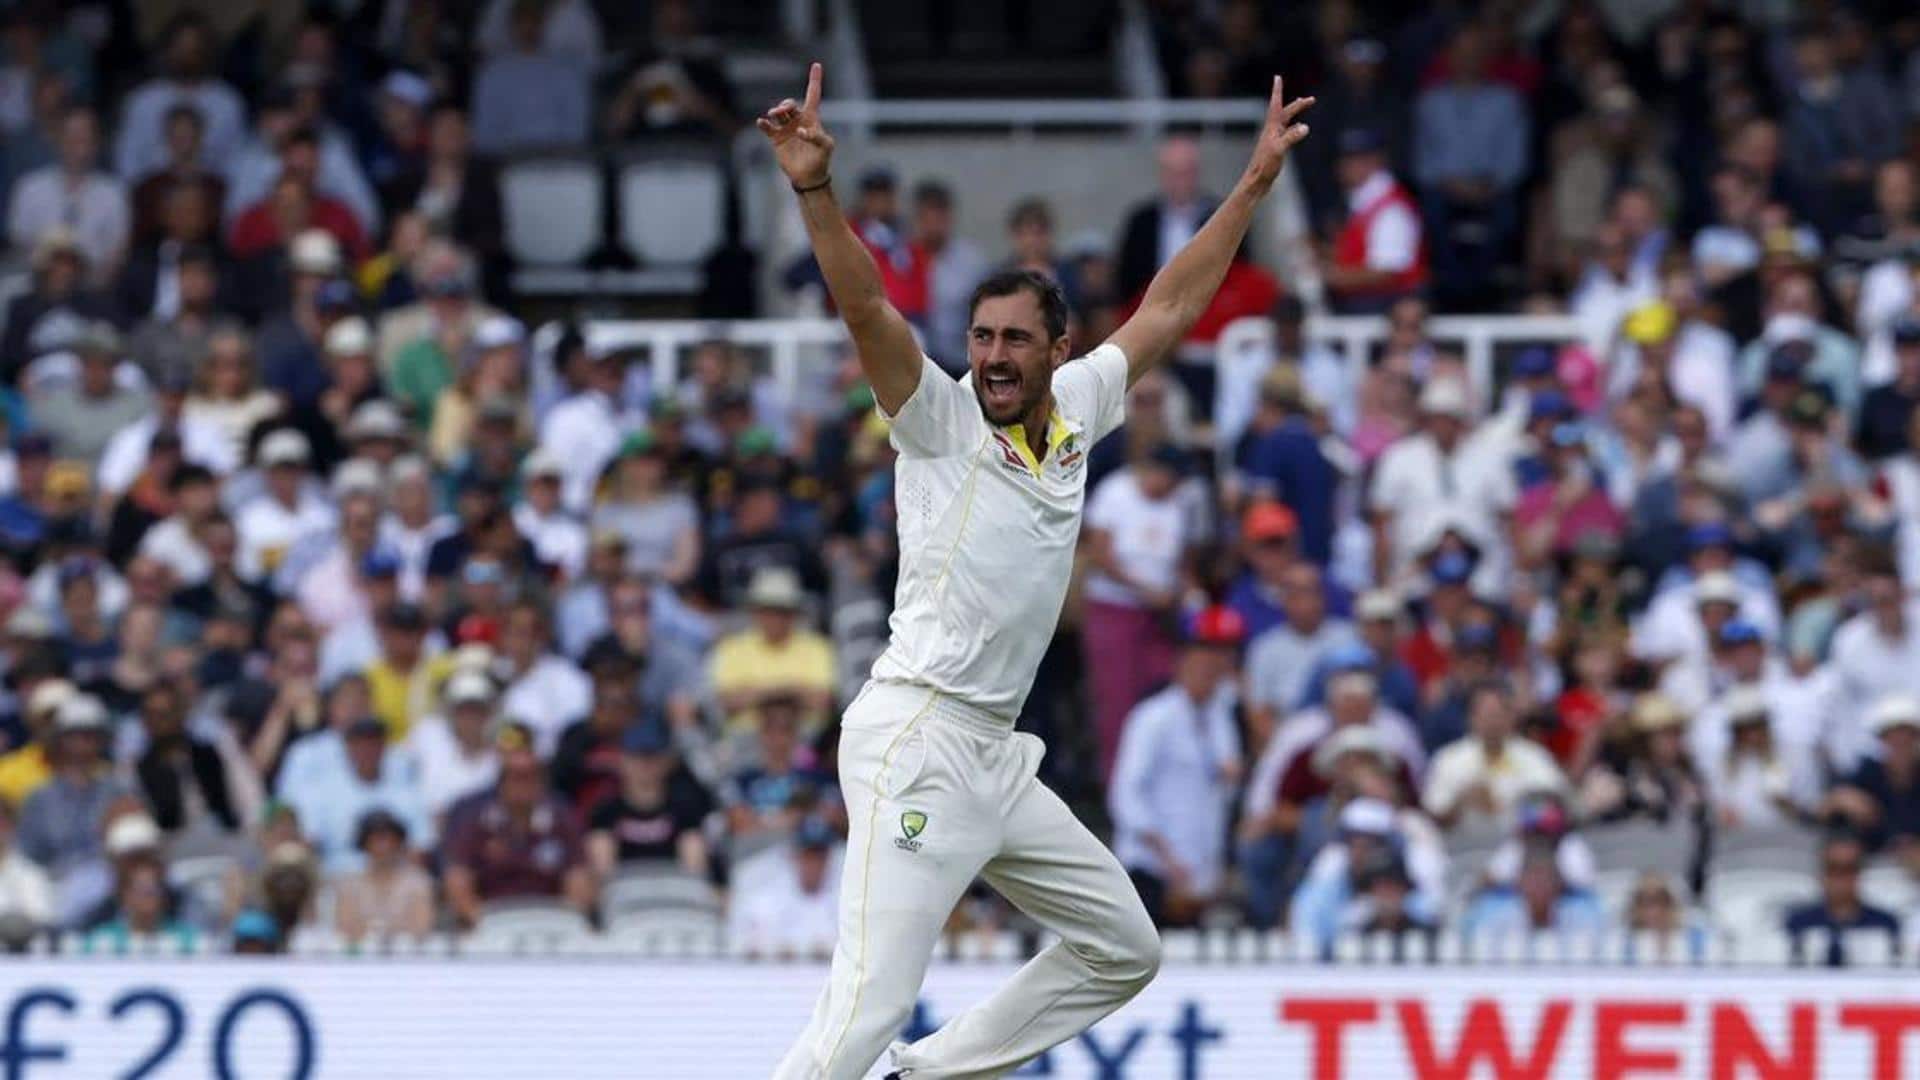 Ashes: Mitchell Starc takes another four-fer in Oval Test